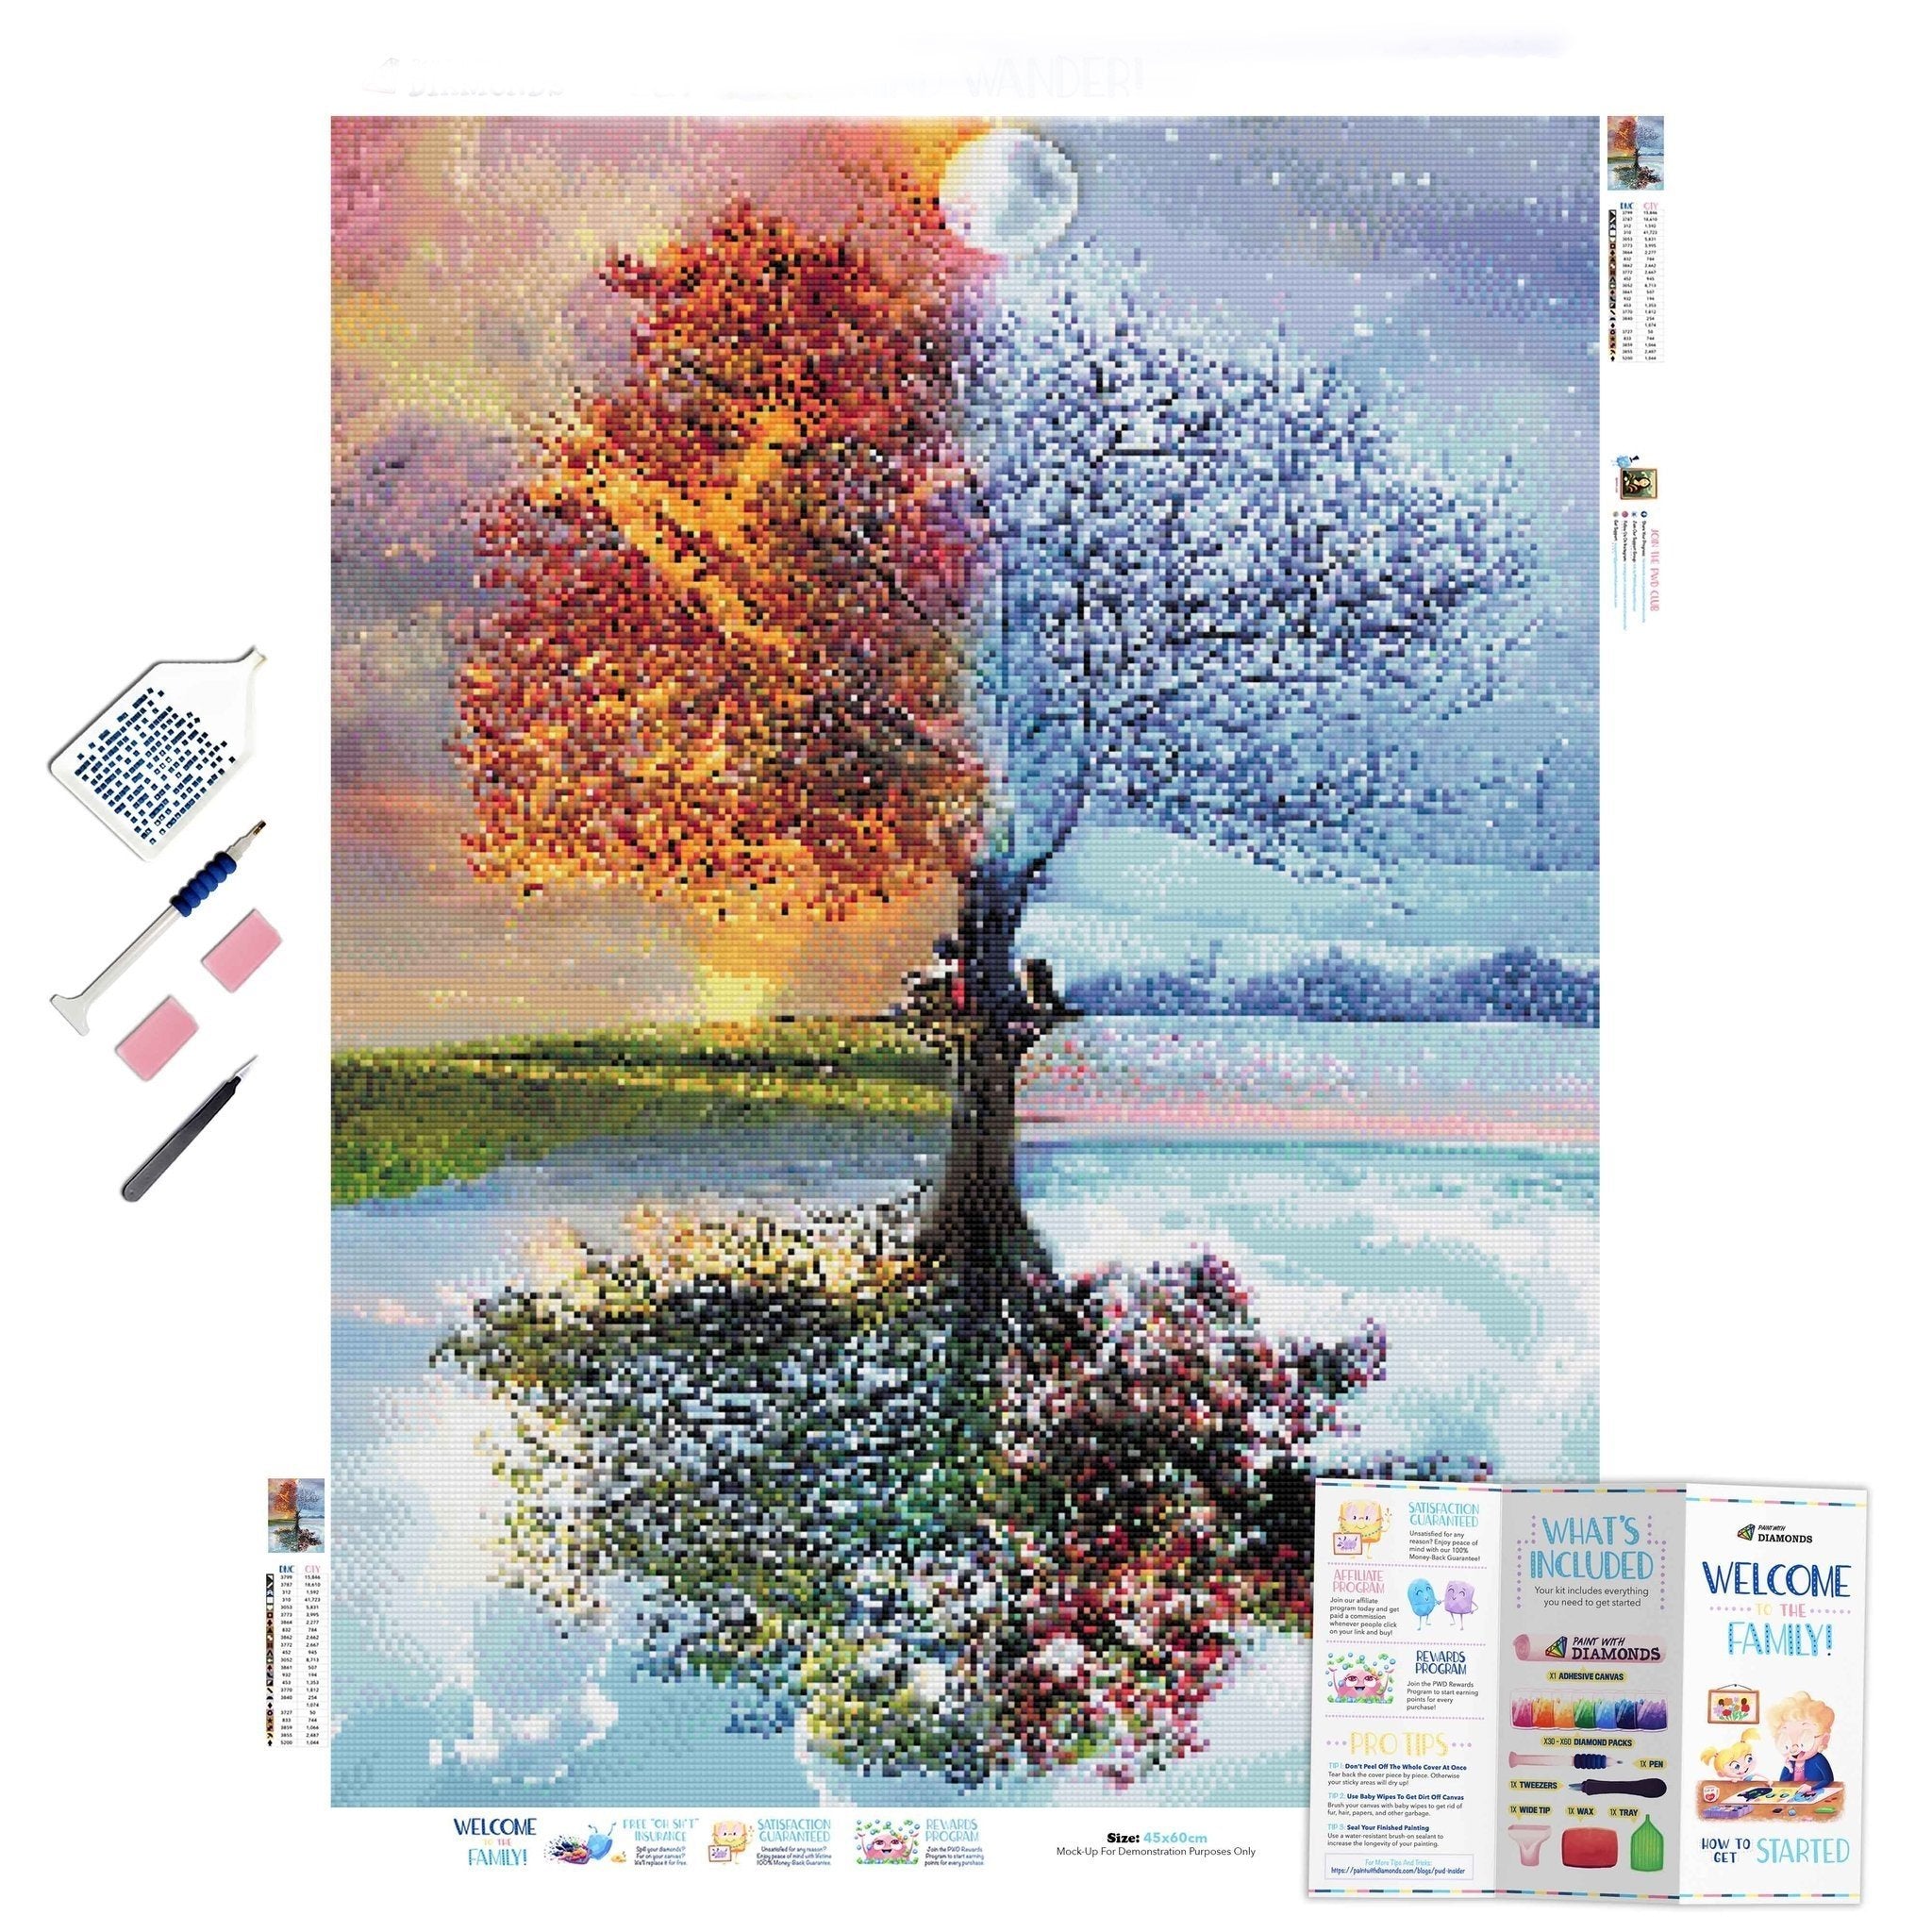 Explore the year with our 4 Seasons kit - capture spring's bloom to winter's chill. 4 Seasons - Diamondartlove